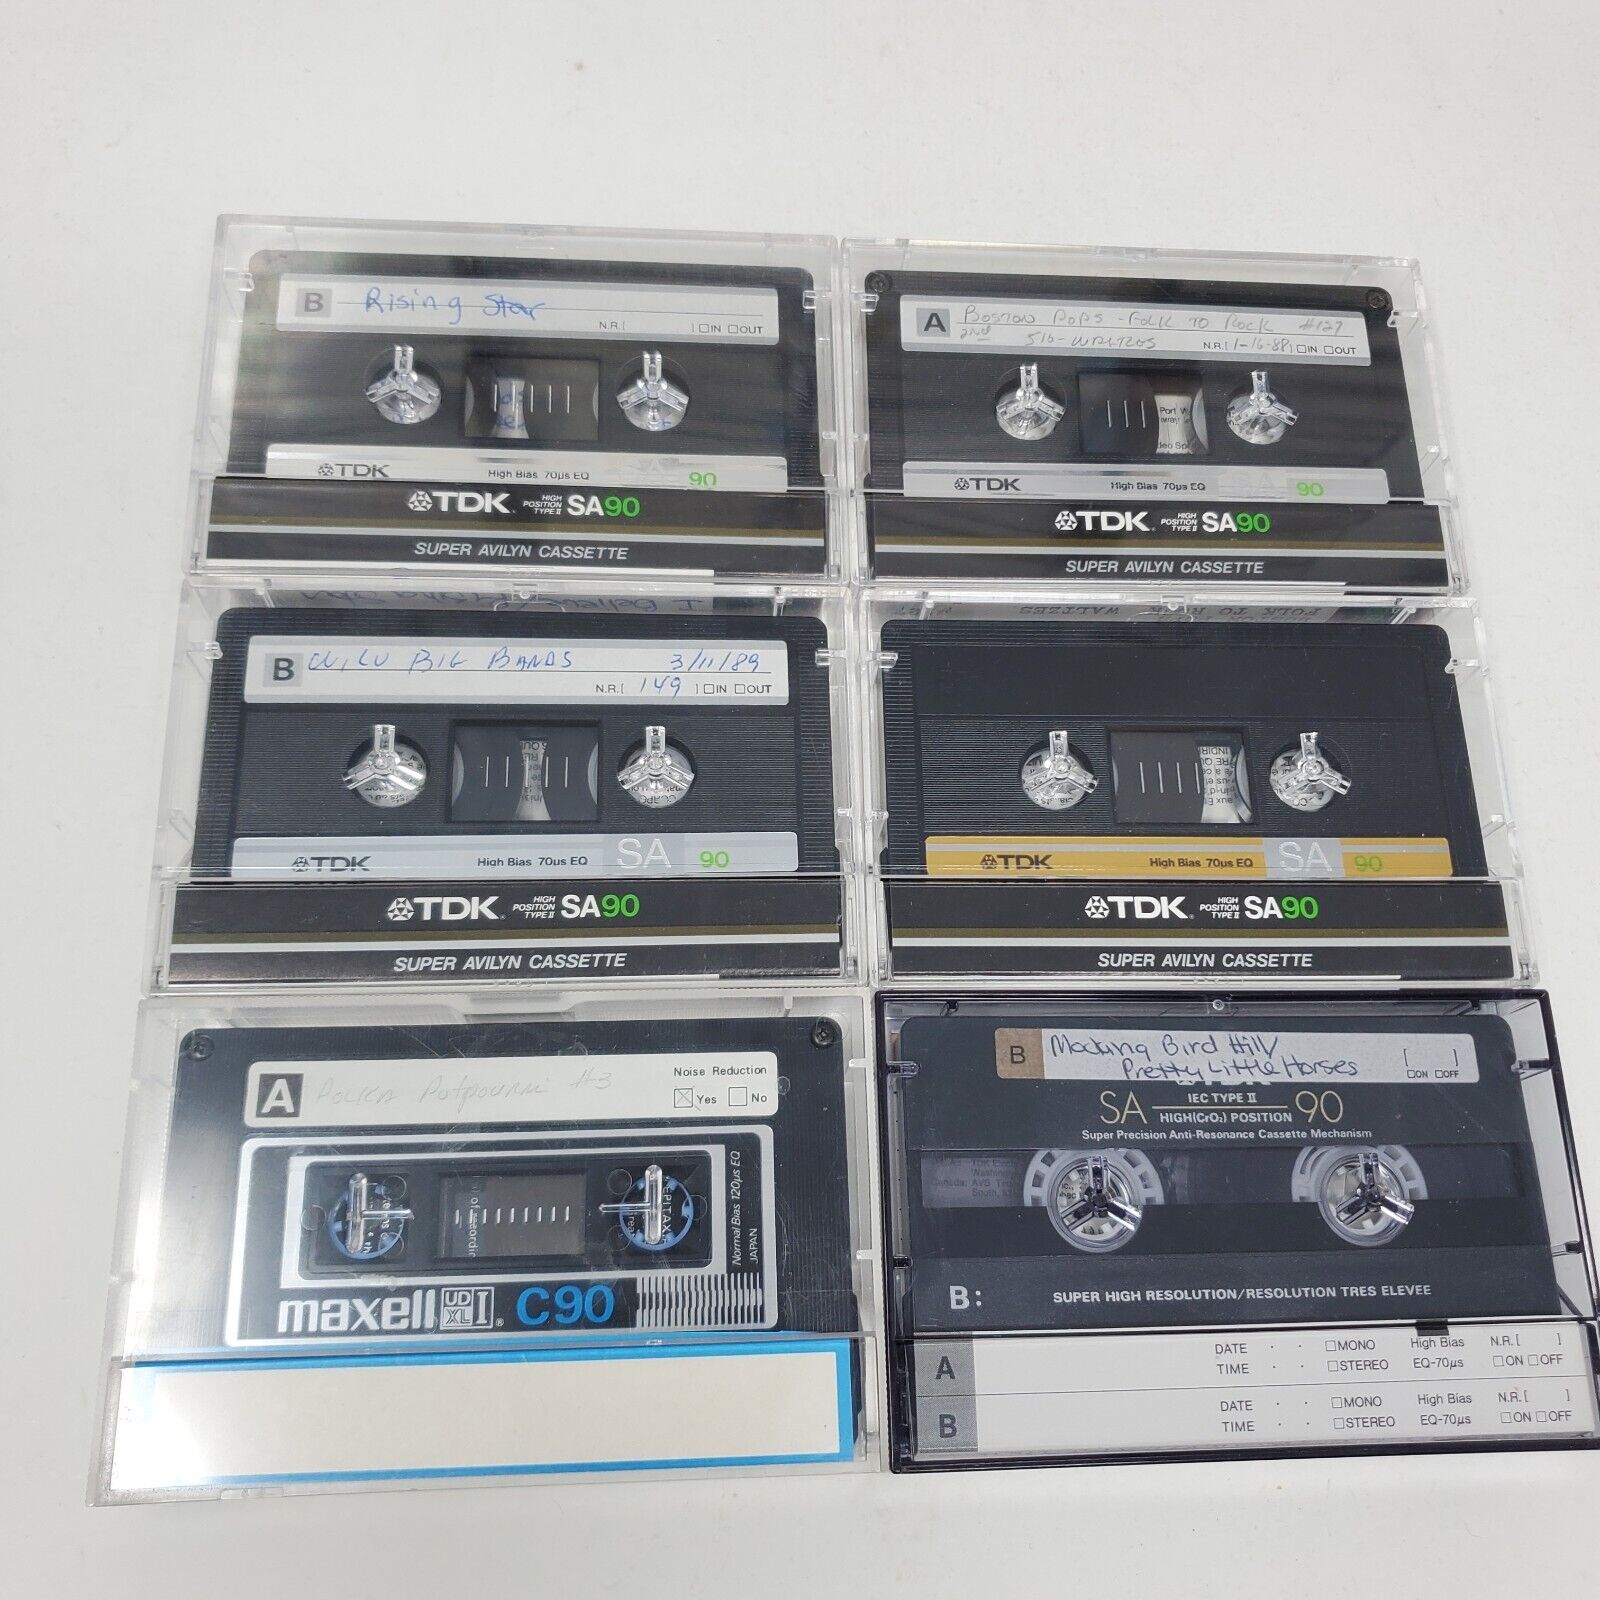 Cassette Lot of 100 with Cases (Recorded On, Maxell XL II, C90, TDK, Sony, Used) Без бренда - фотография #2